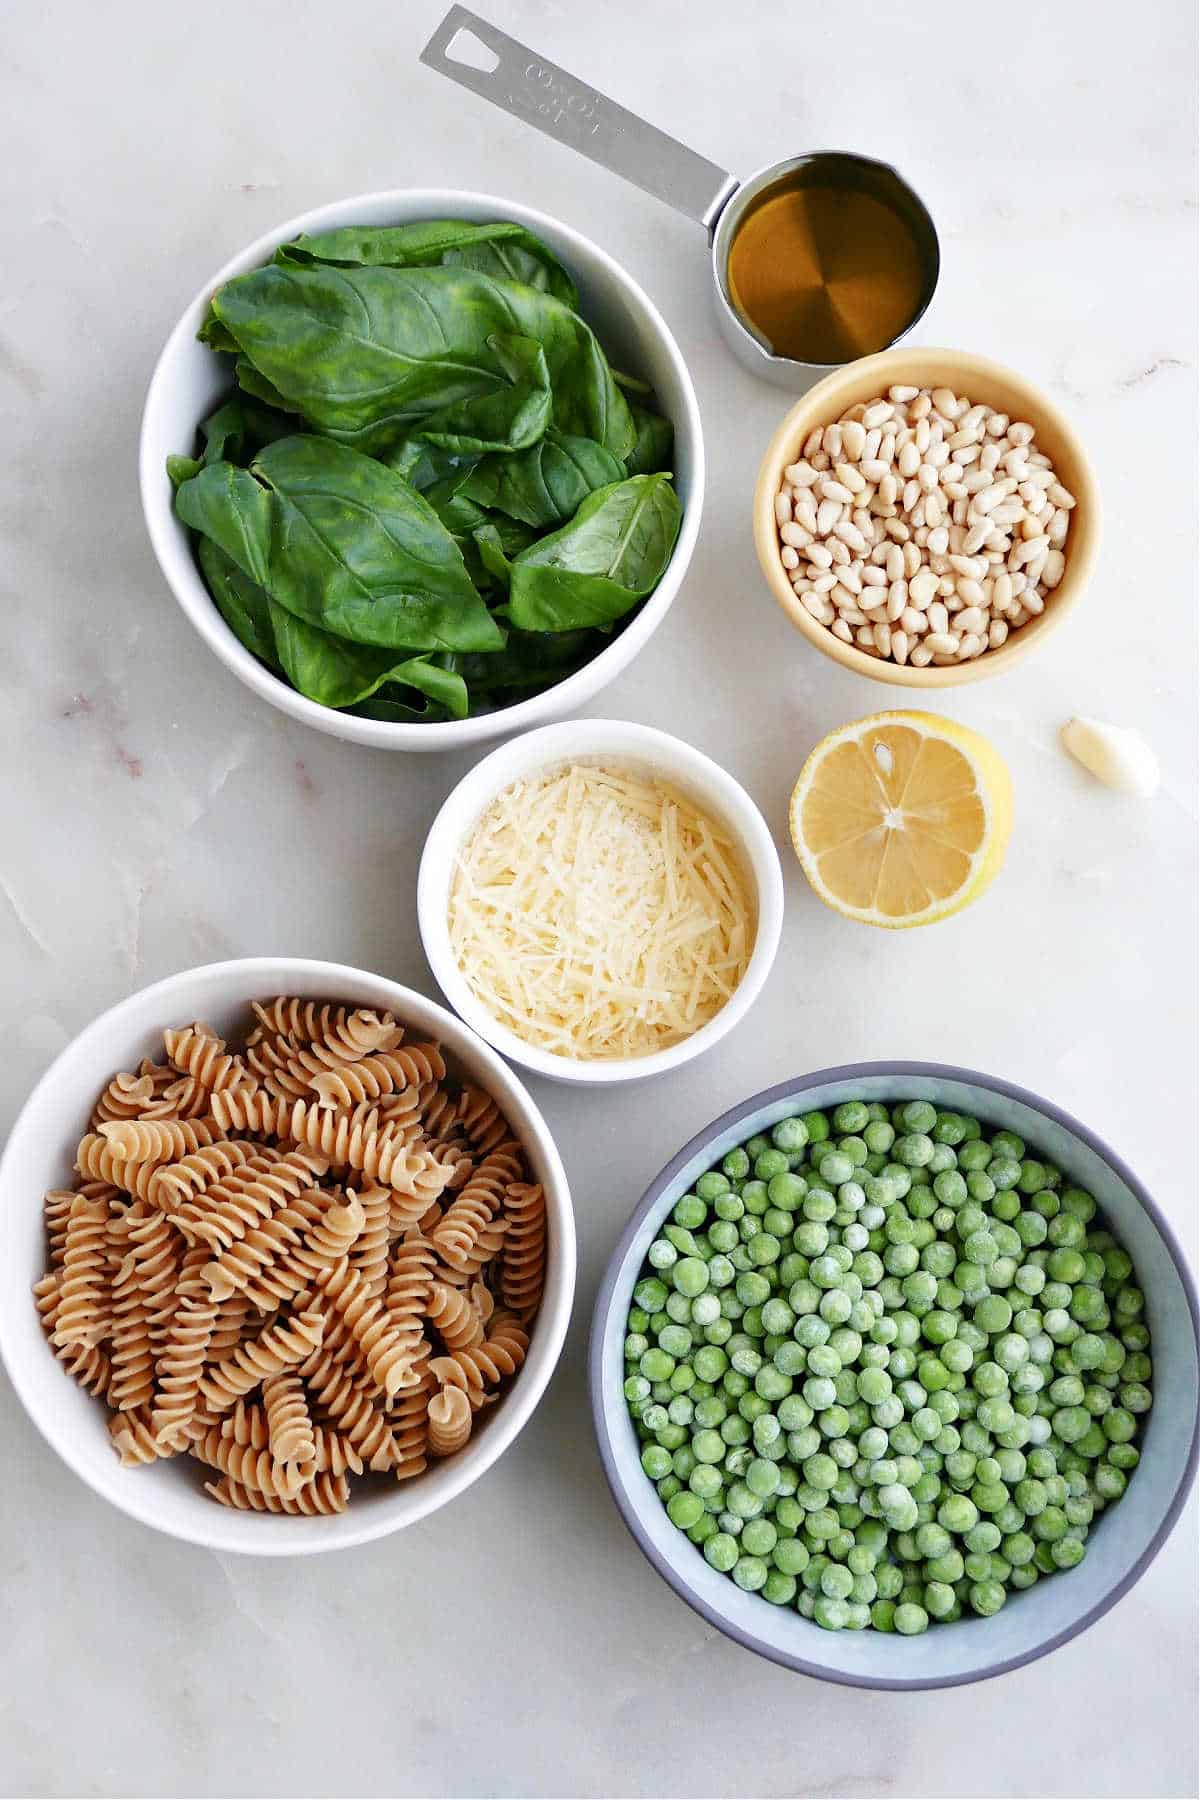 basil, olive oil, pine nuts, parmesan cheese, lemon, garlic, pasta, and peas on a counter